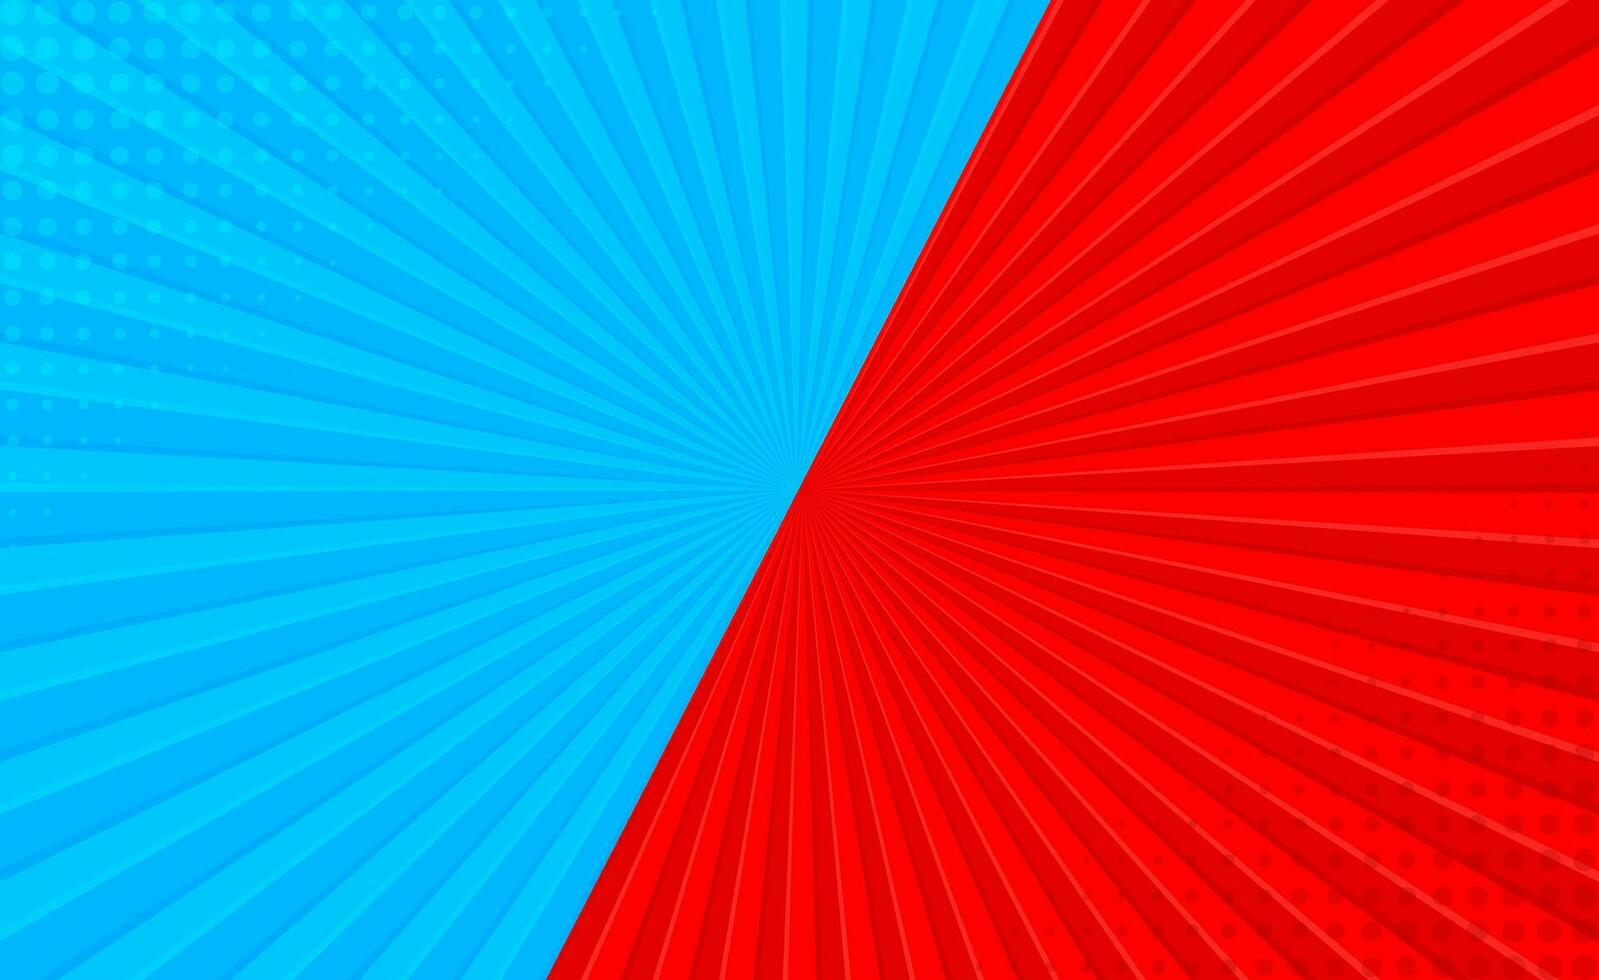 Sun light rays sun pop art Retro vintage style background with blue and red color. Comic book pop art strip radial backdrop halftone Abstract summer sunny Vintage radial versus background. vector